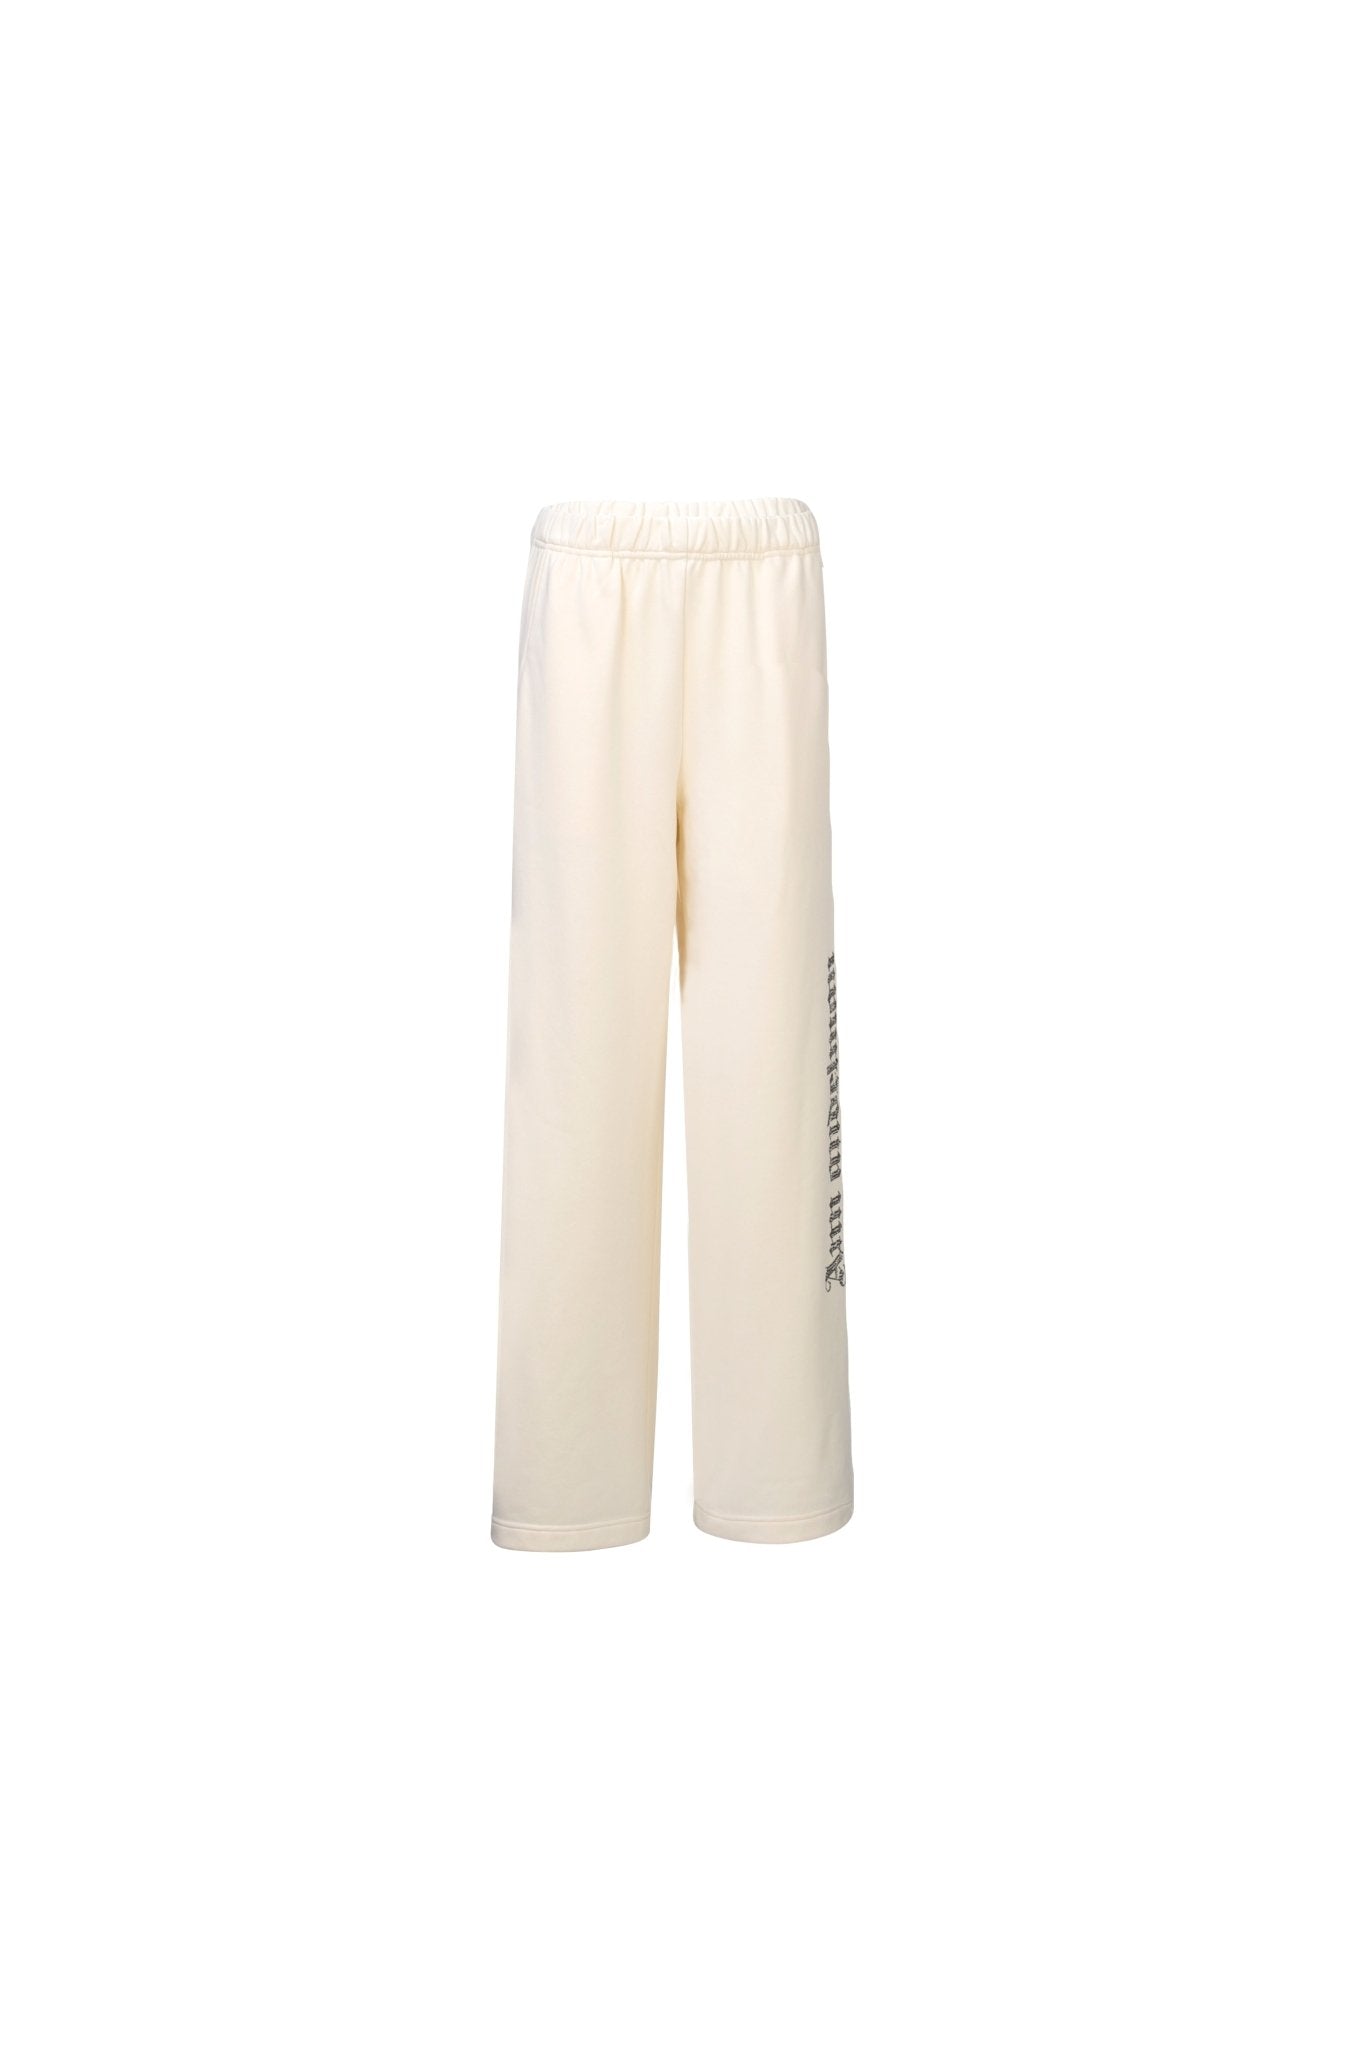 ANN ANDELMAN Gothic Crystal Long Pants White | MADA IN CHINA